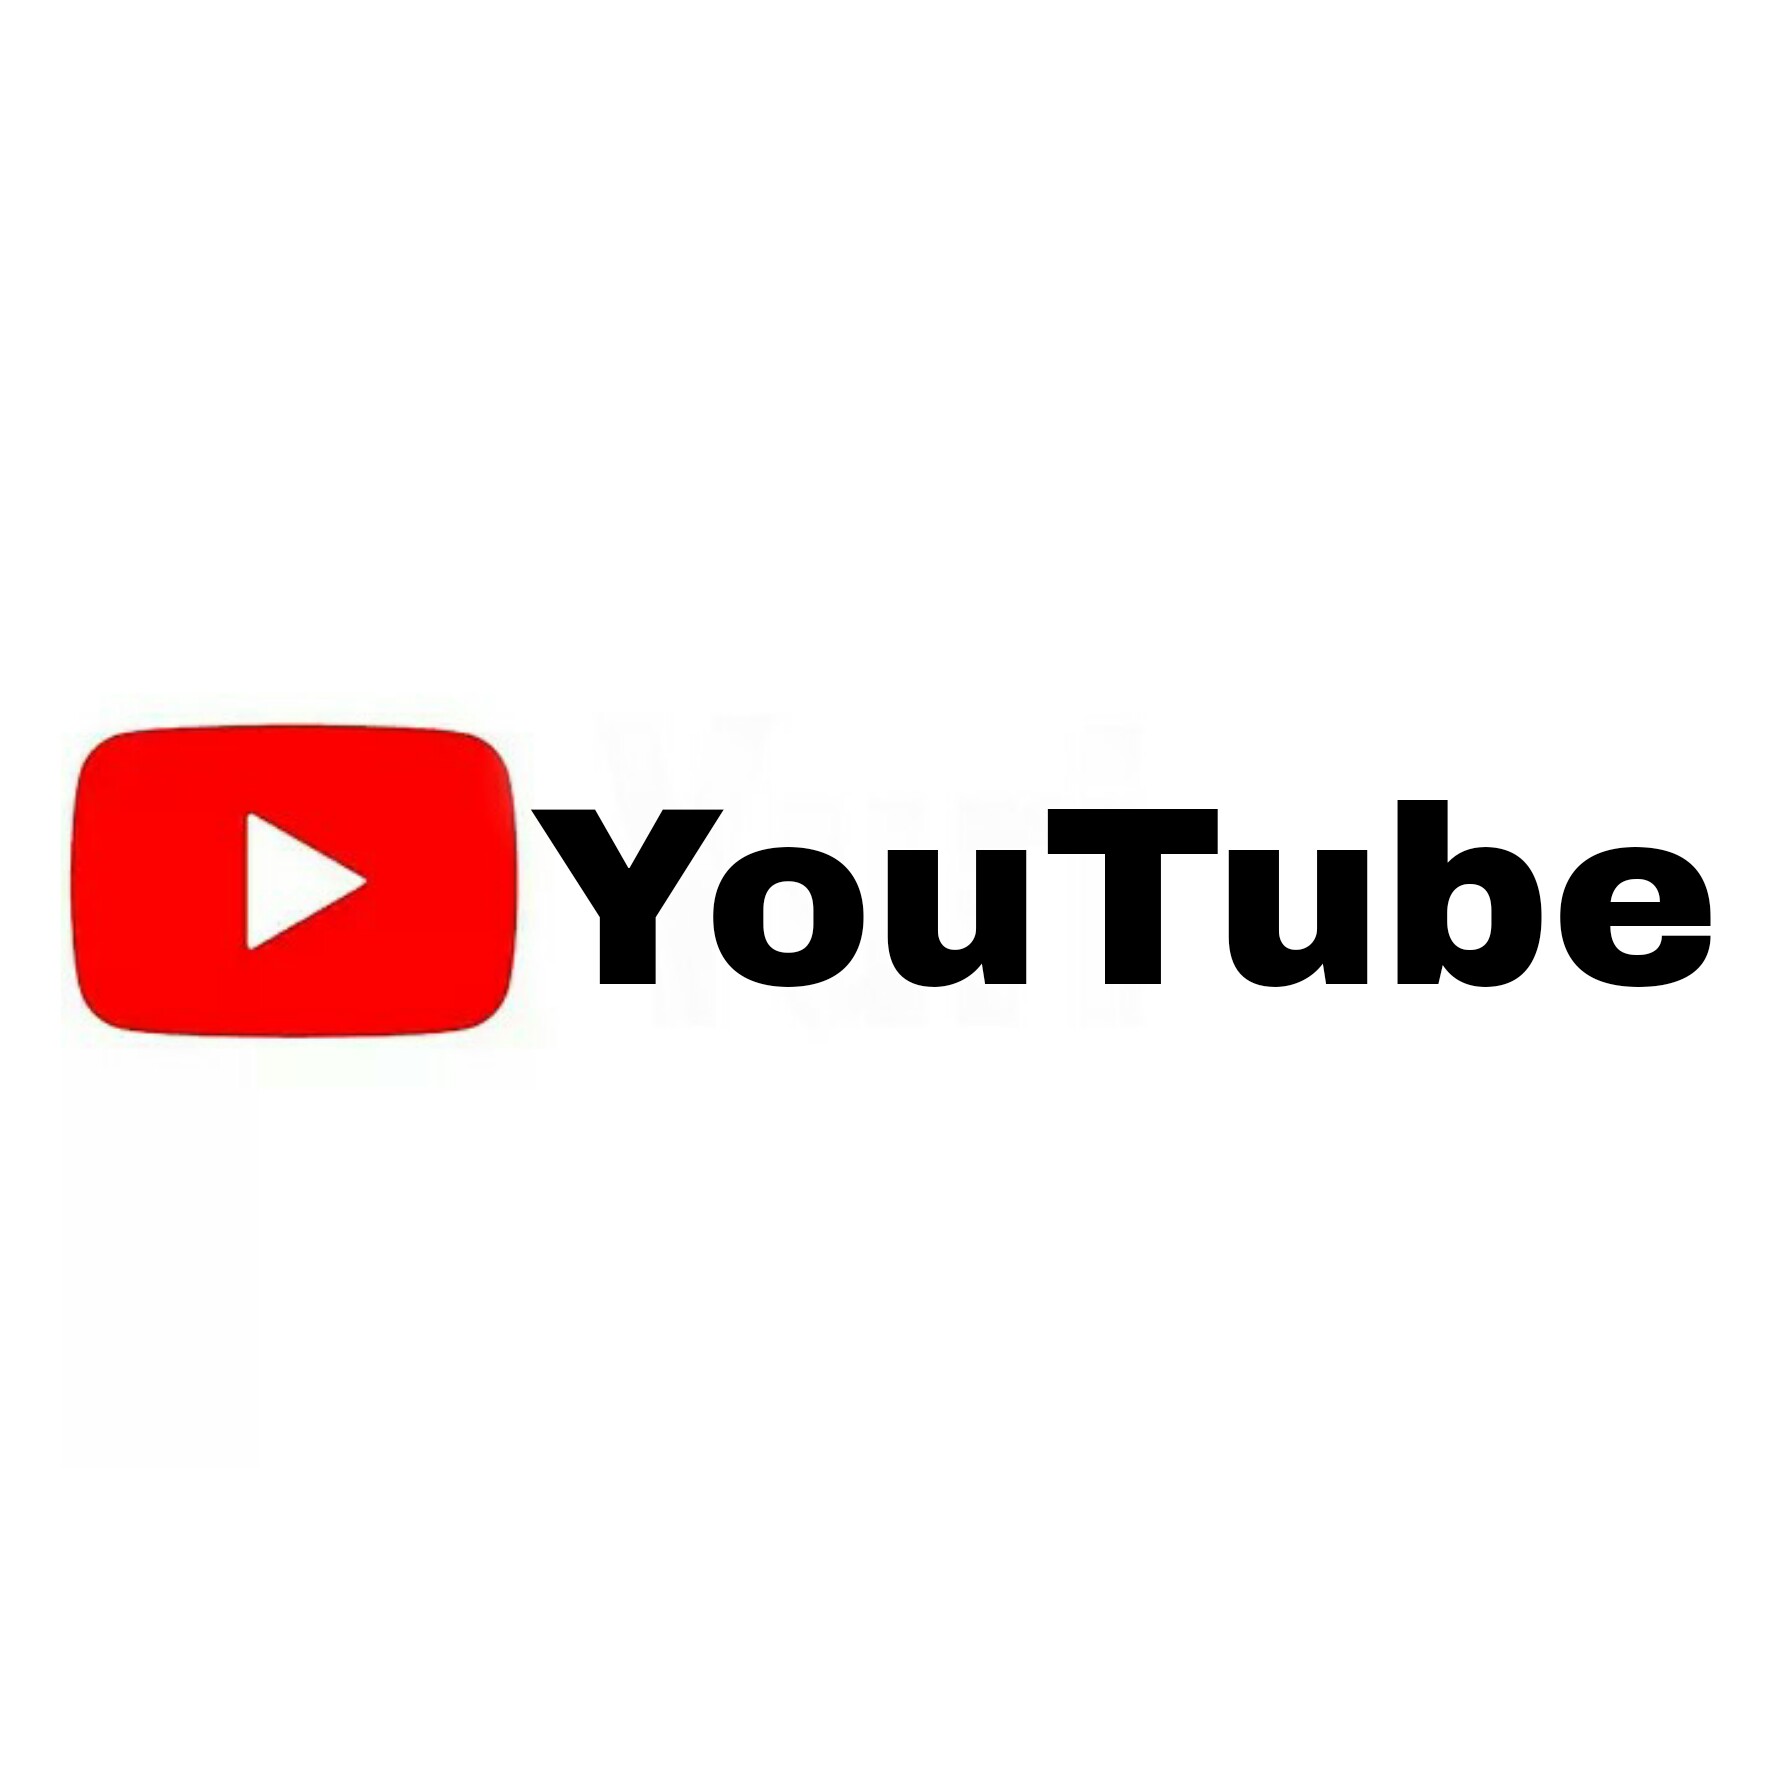 Youtube ロゴ Youtubeロゴ 新youtubeロゴ By Mouri7